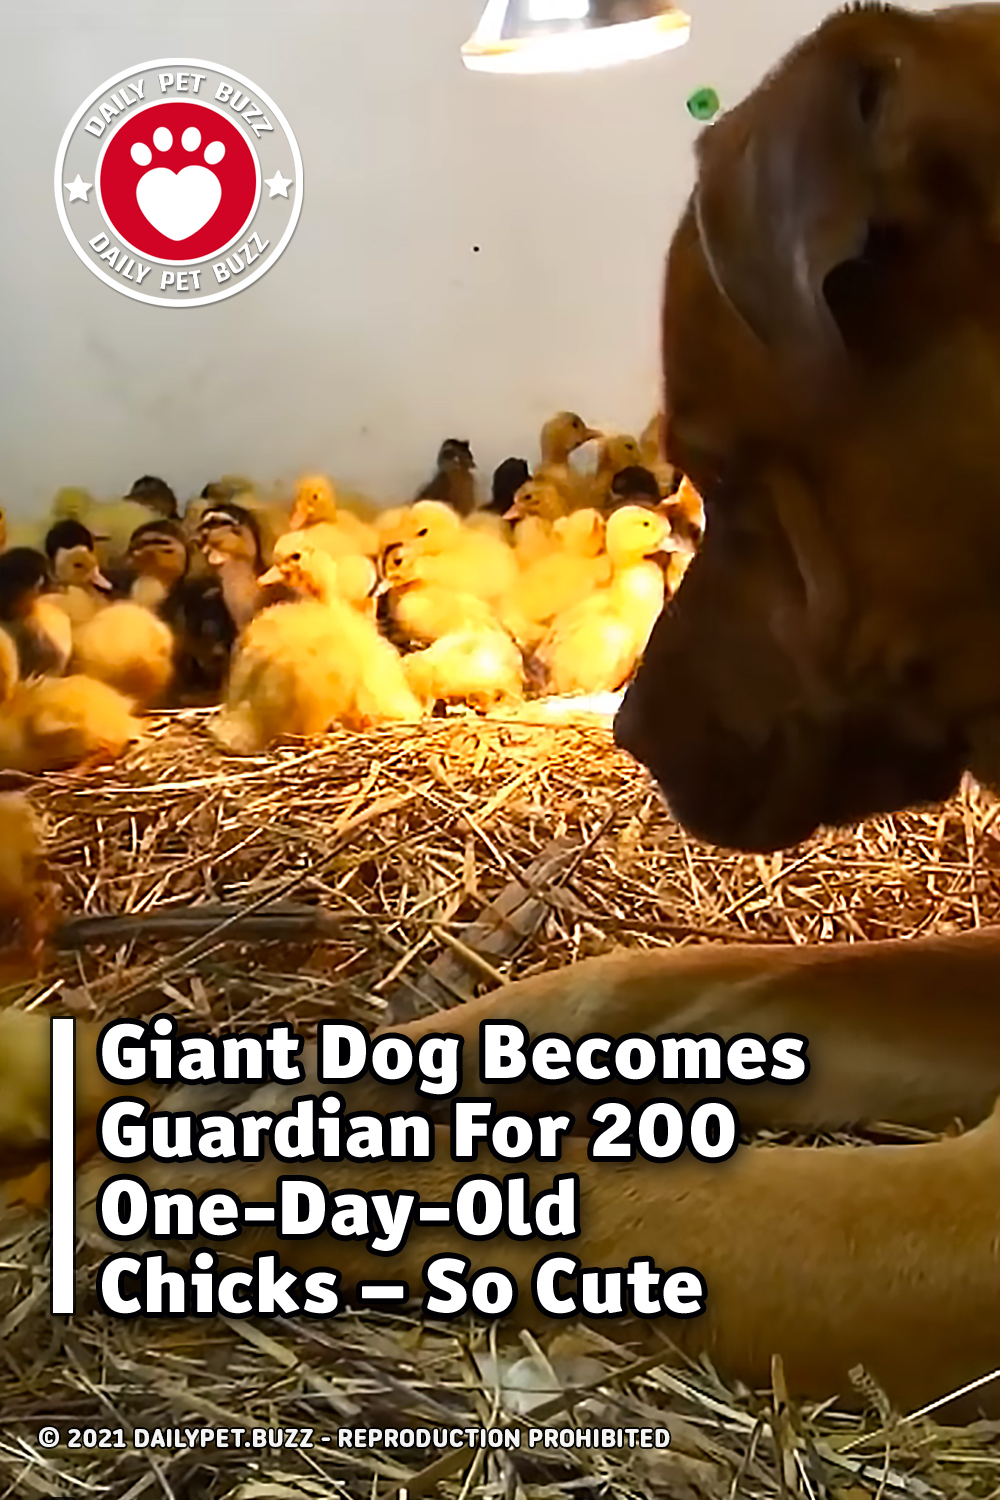 Giant Dog Becomes Guardian For 200 One-Day-Old Ducklings – So Cute